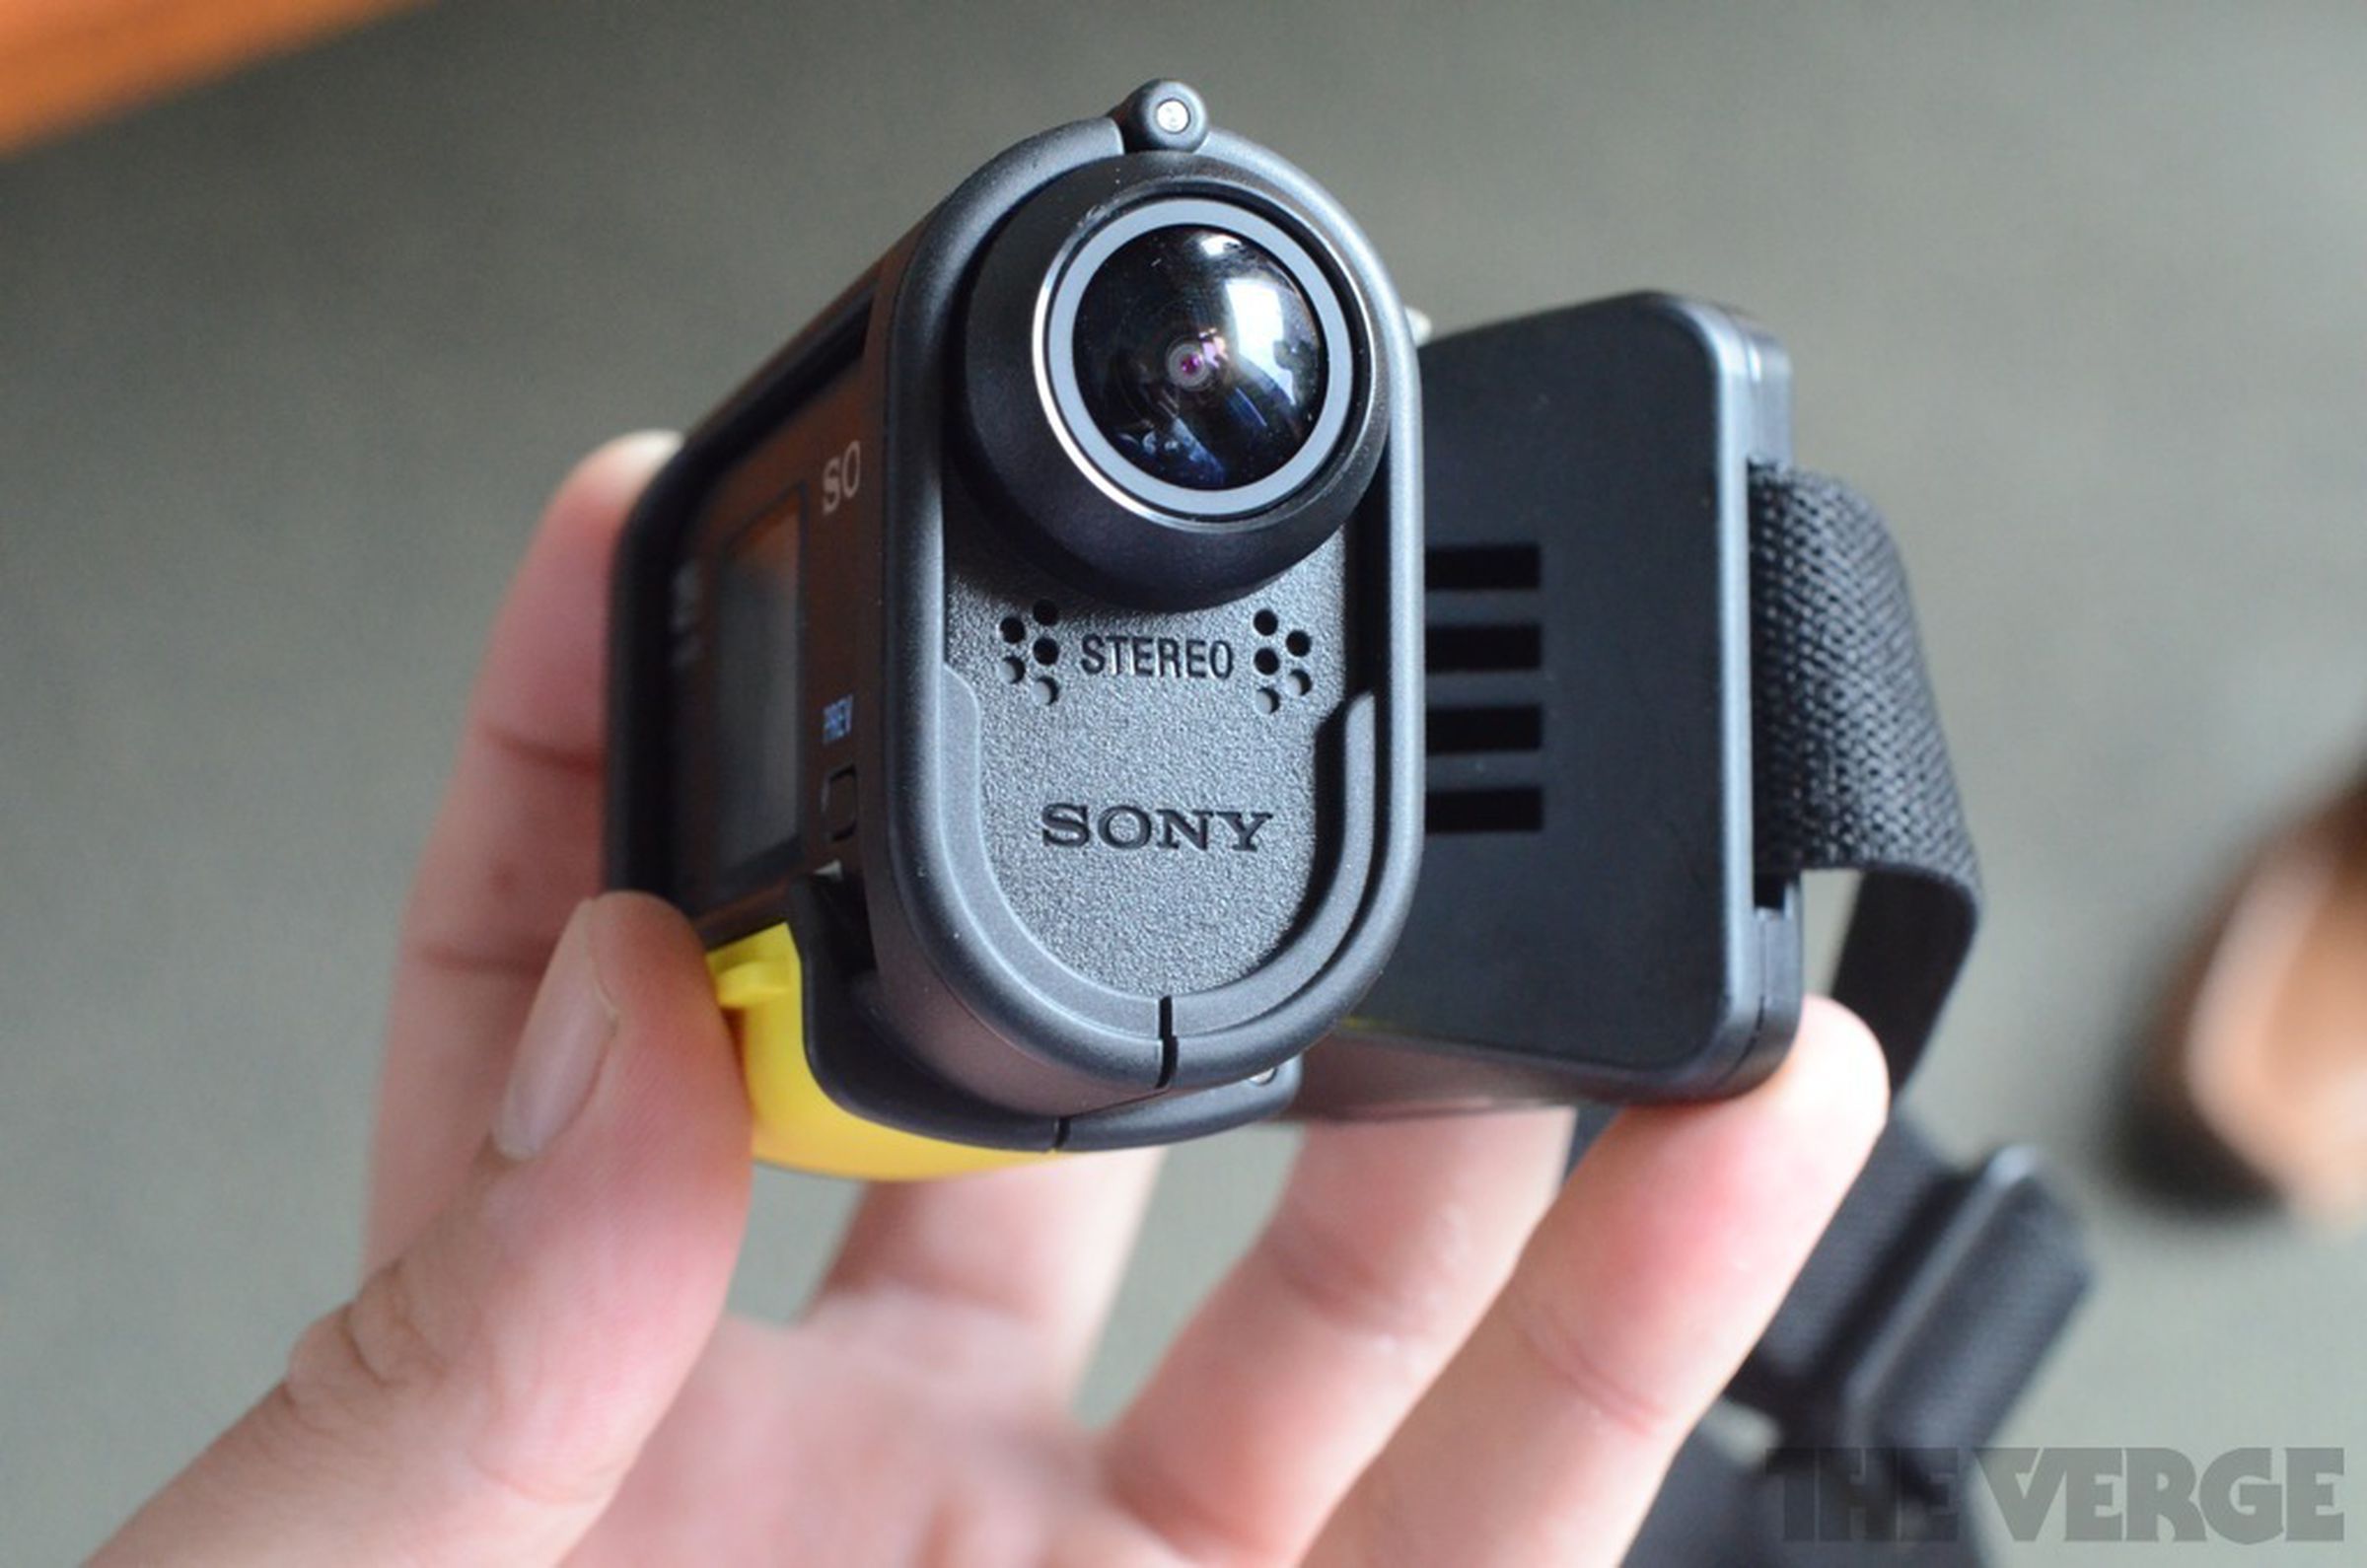 Sony Action Cam pictures